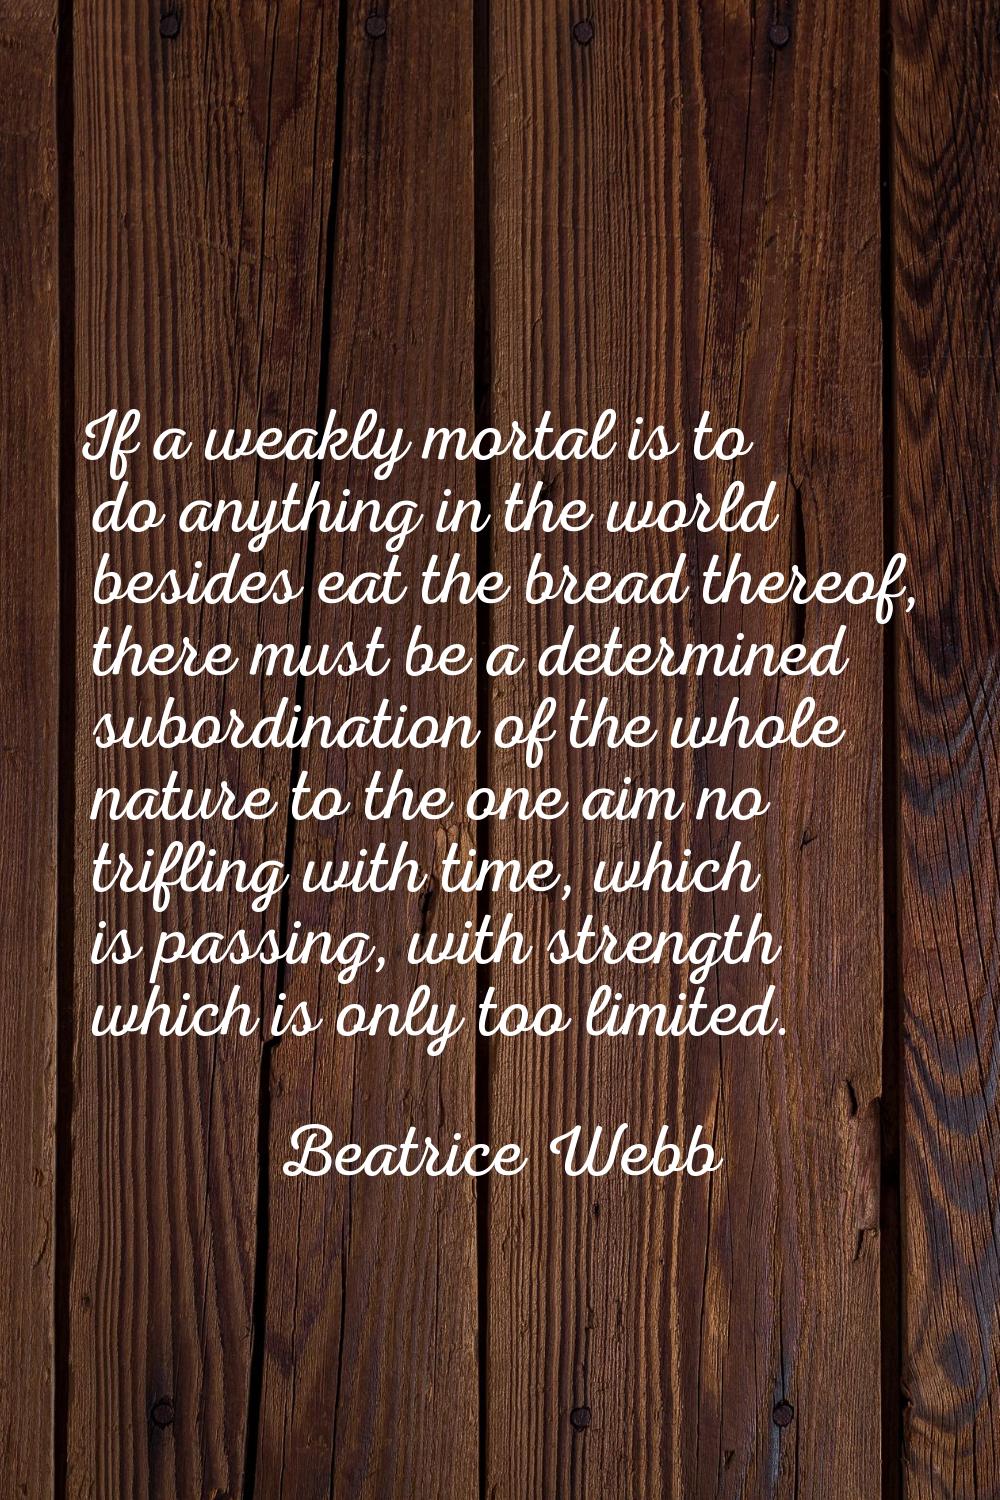 If a weakly mortal is to do anything in the world besides eat the bread thereof, there must be a de